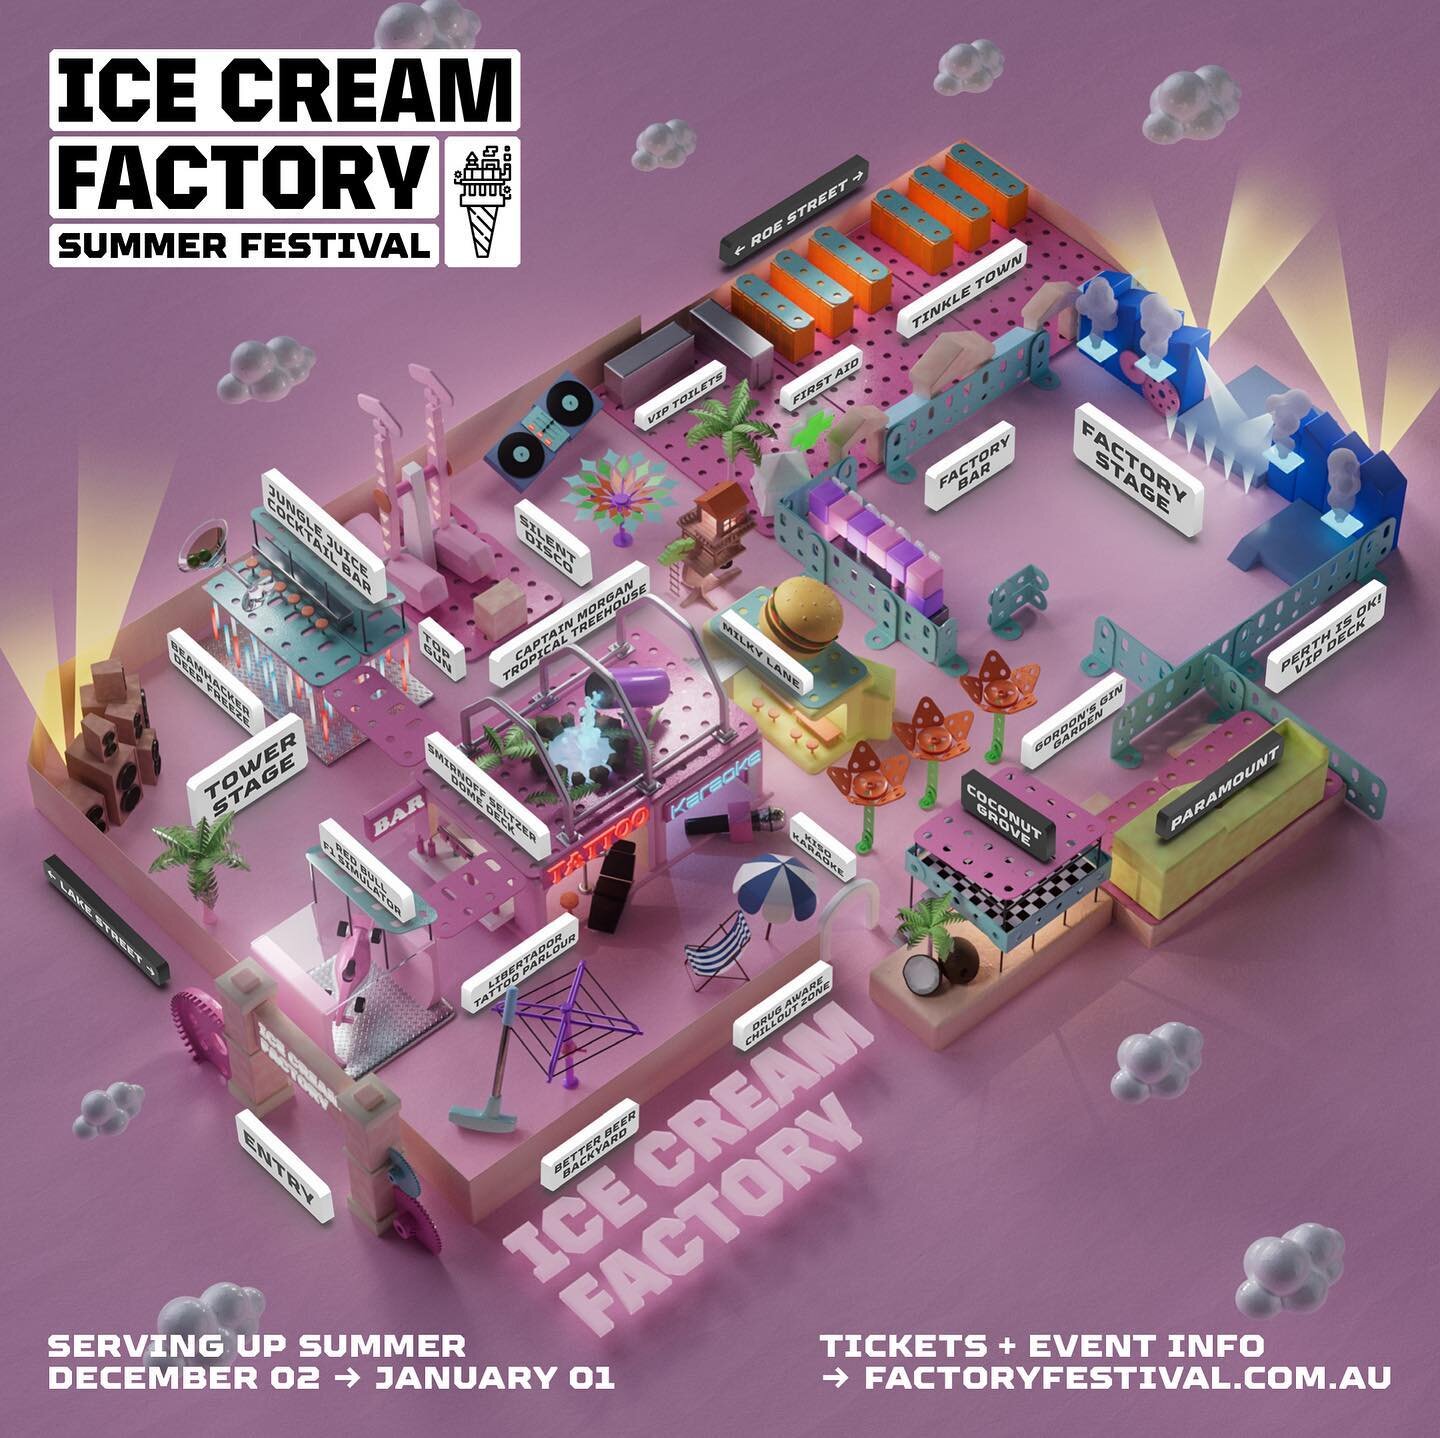 ICE CREAM FACTORY MAP REVEAL⚡️

The 2022 Ice Cream Factory Site map is here! Check it out 👇🏻

👩&zwj;🎤 Outdoor DJ Tower Stage
🥶 Beamhacker Deep Freeze
🧃Jungle Juice Cocktail Bar by Idle Hands
🎢Top Gun Ride
🎧Funk Silent Disco
🏝Captain Morgan T